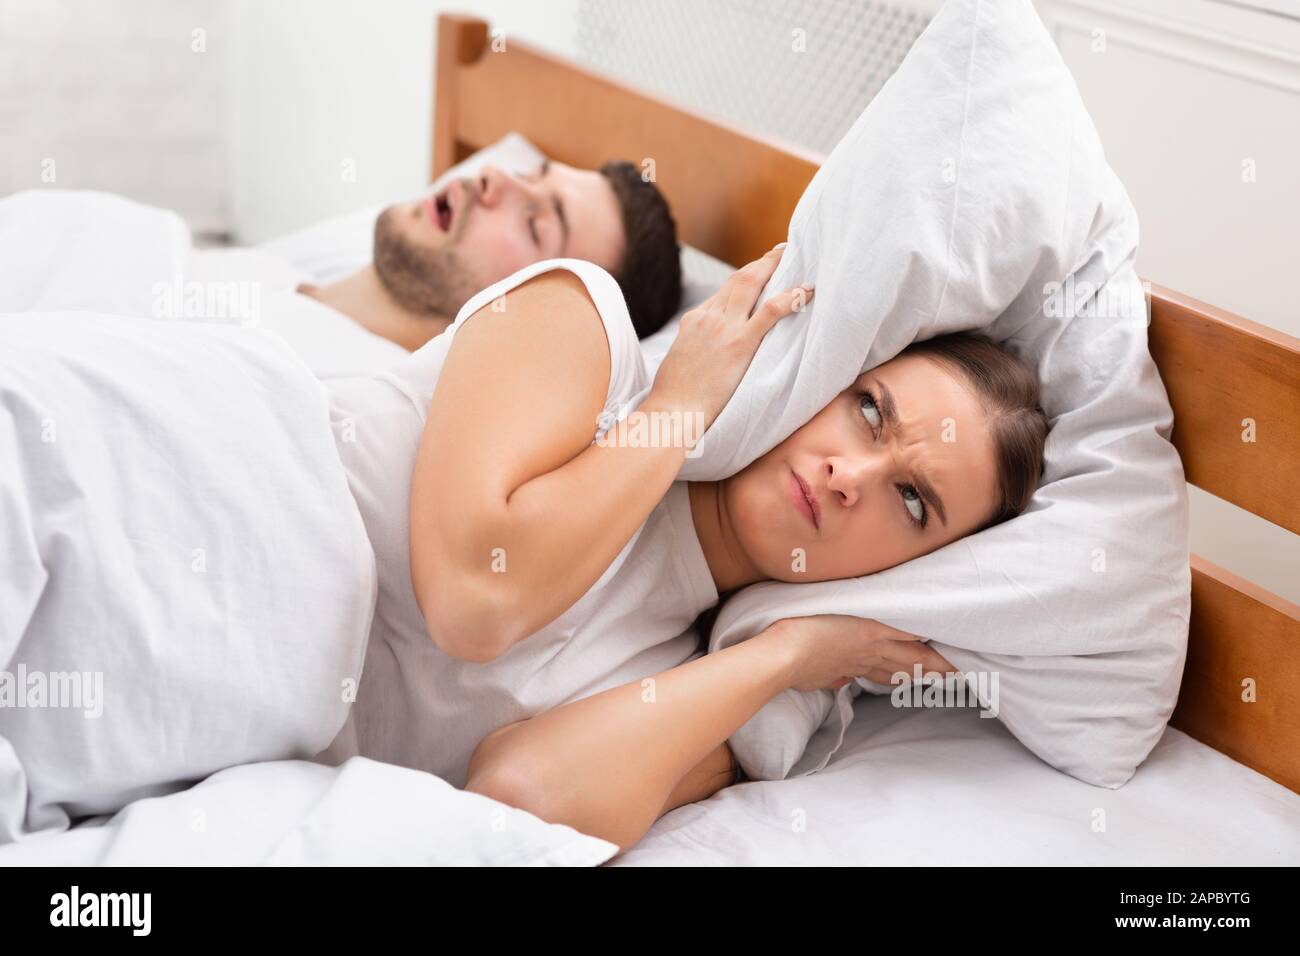 Angry Girlfriend Covering Ears Lying Near Snoring Boyfriend In Bed Stock Photo